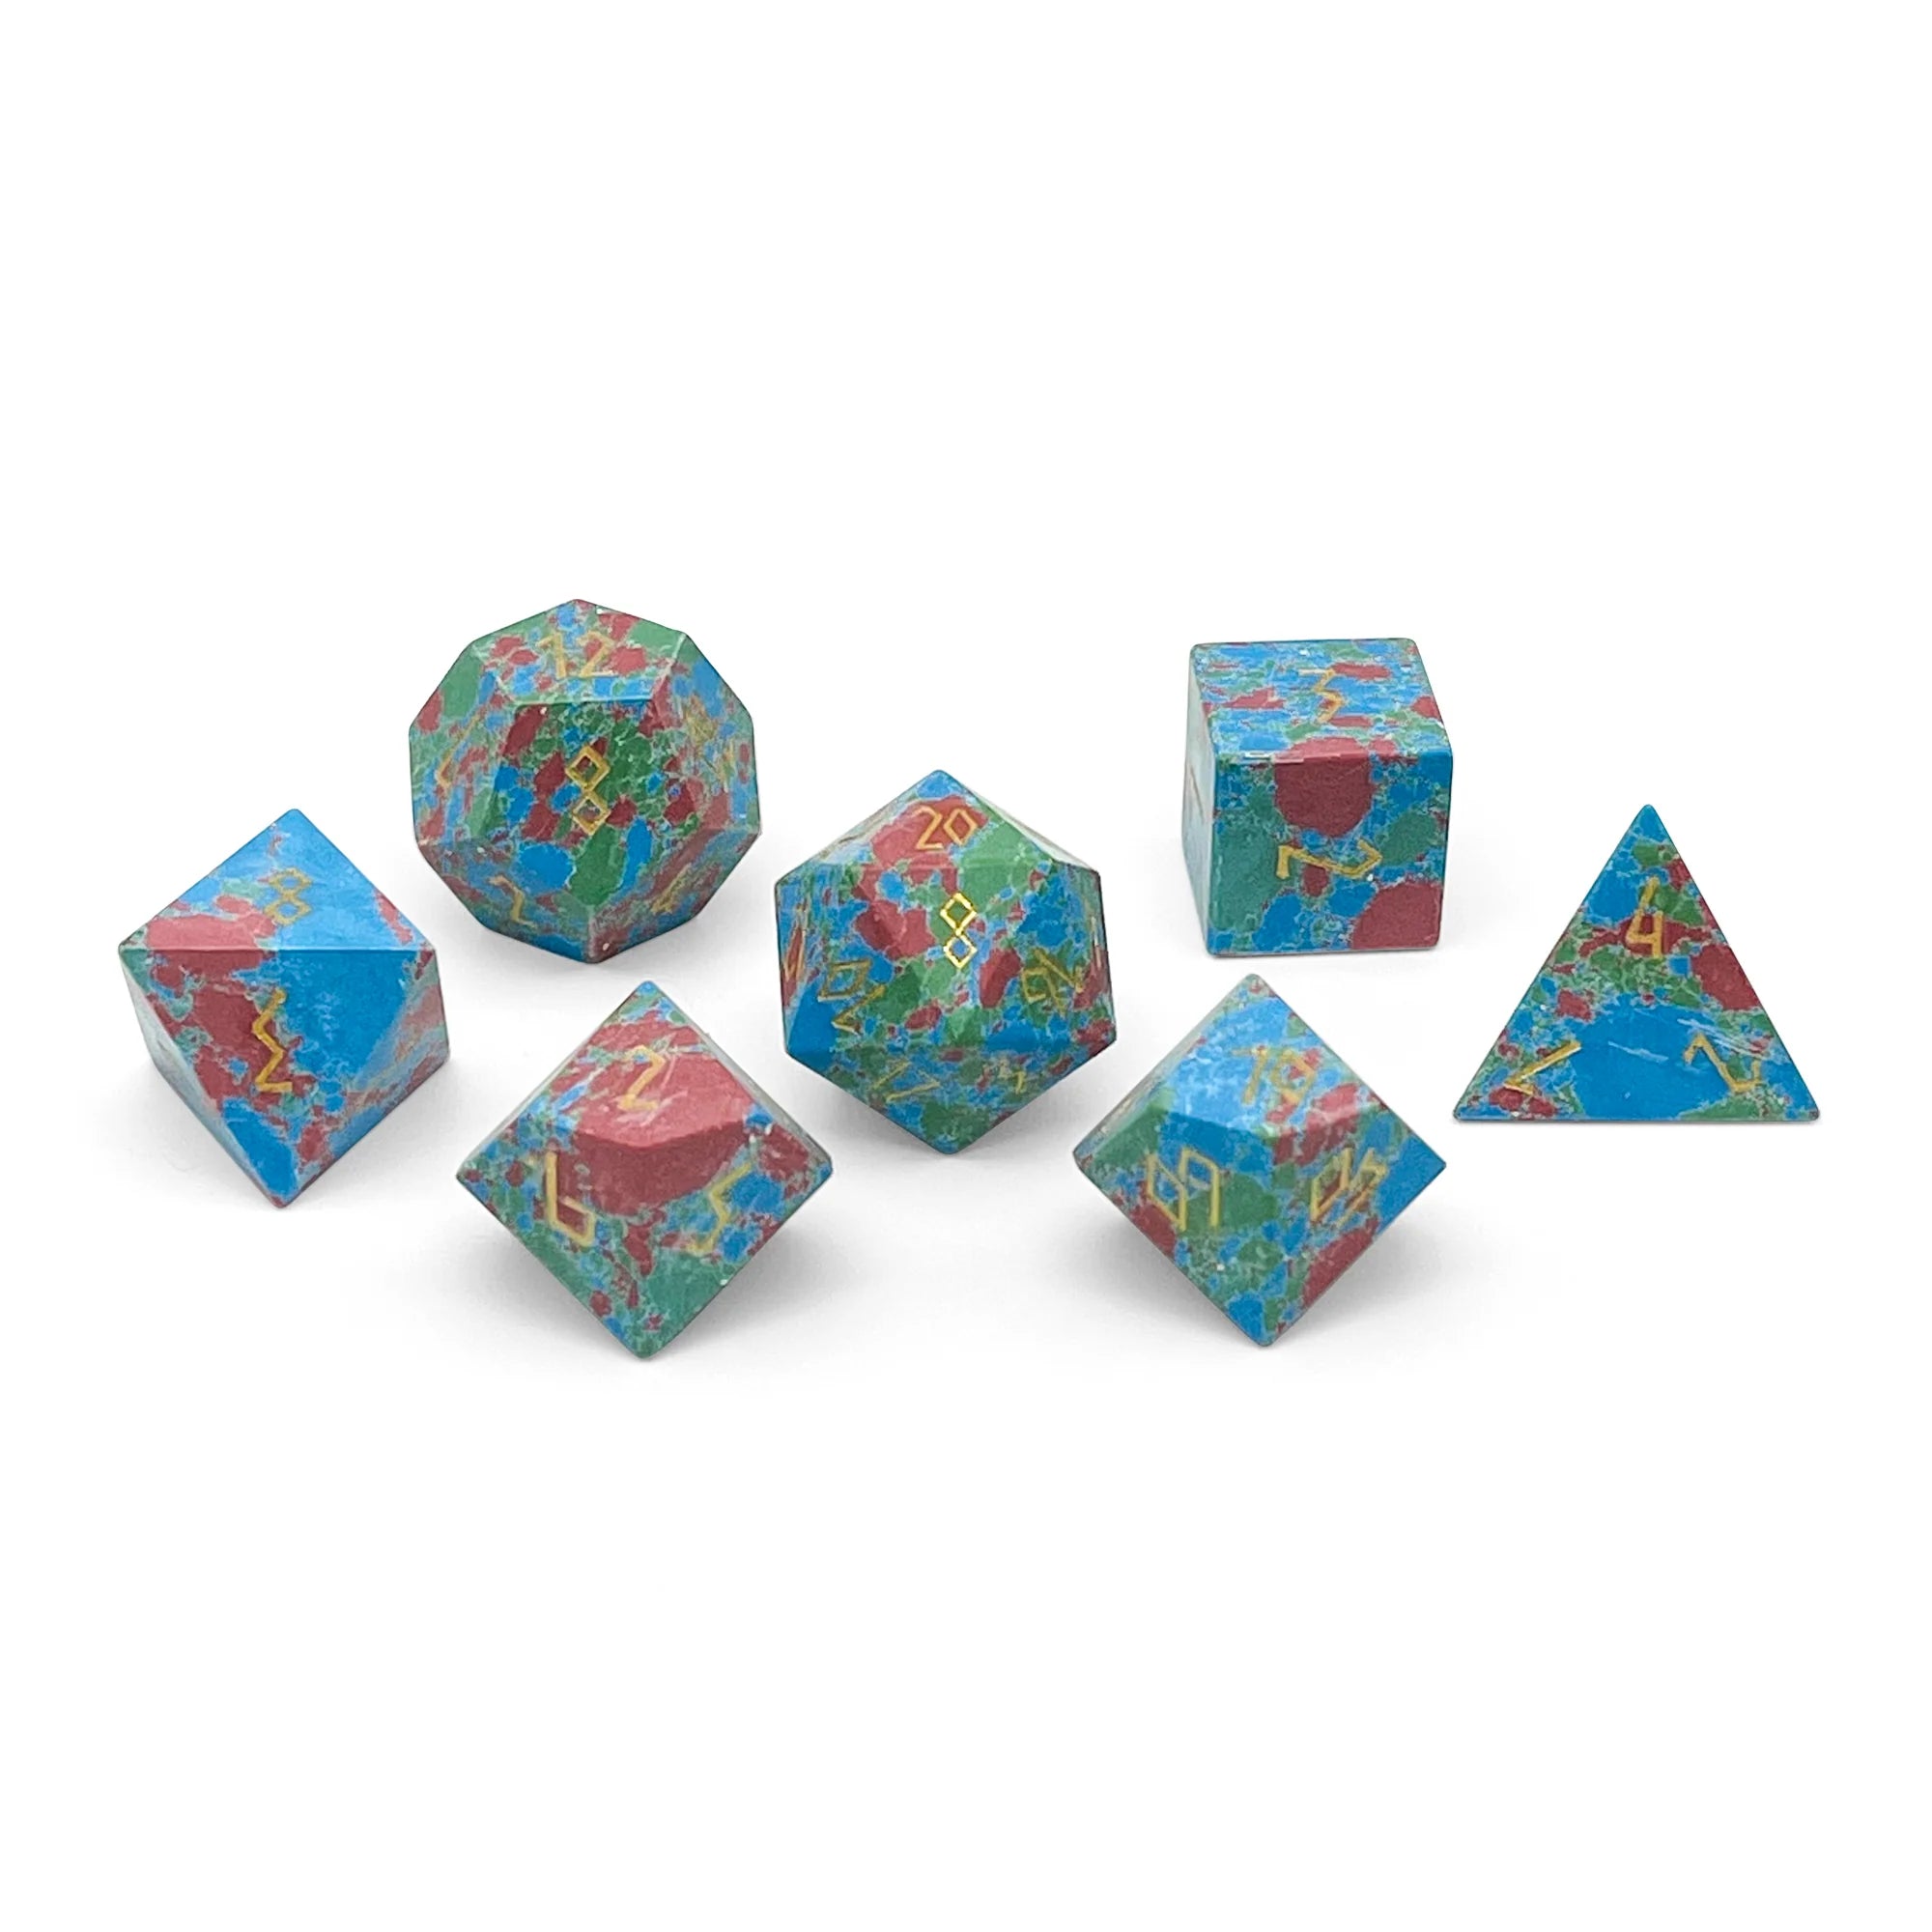 RED, GREEN, AND BLUE SPLOTTED TURQUOISE - 7 PIECE RPG SET TRUSTONE DICE | Gopher Games